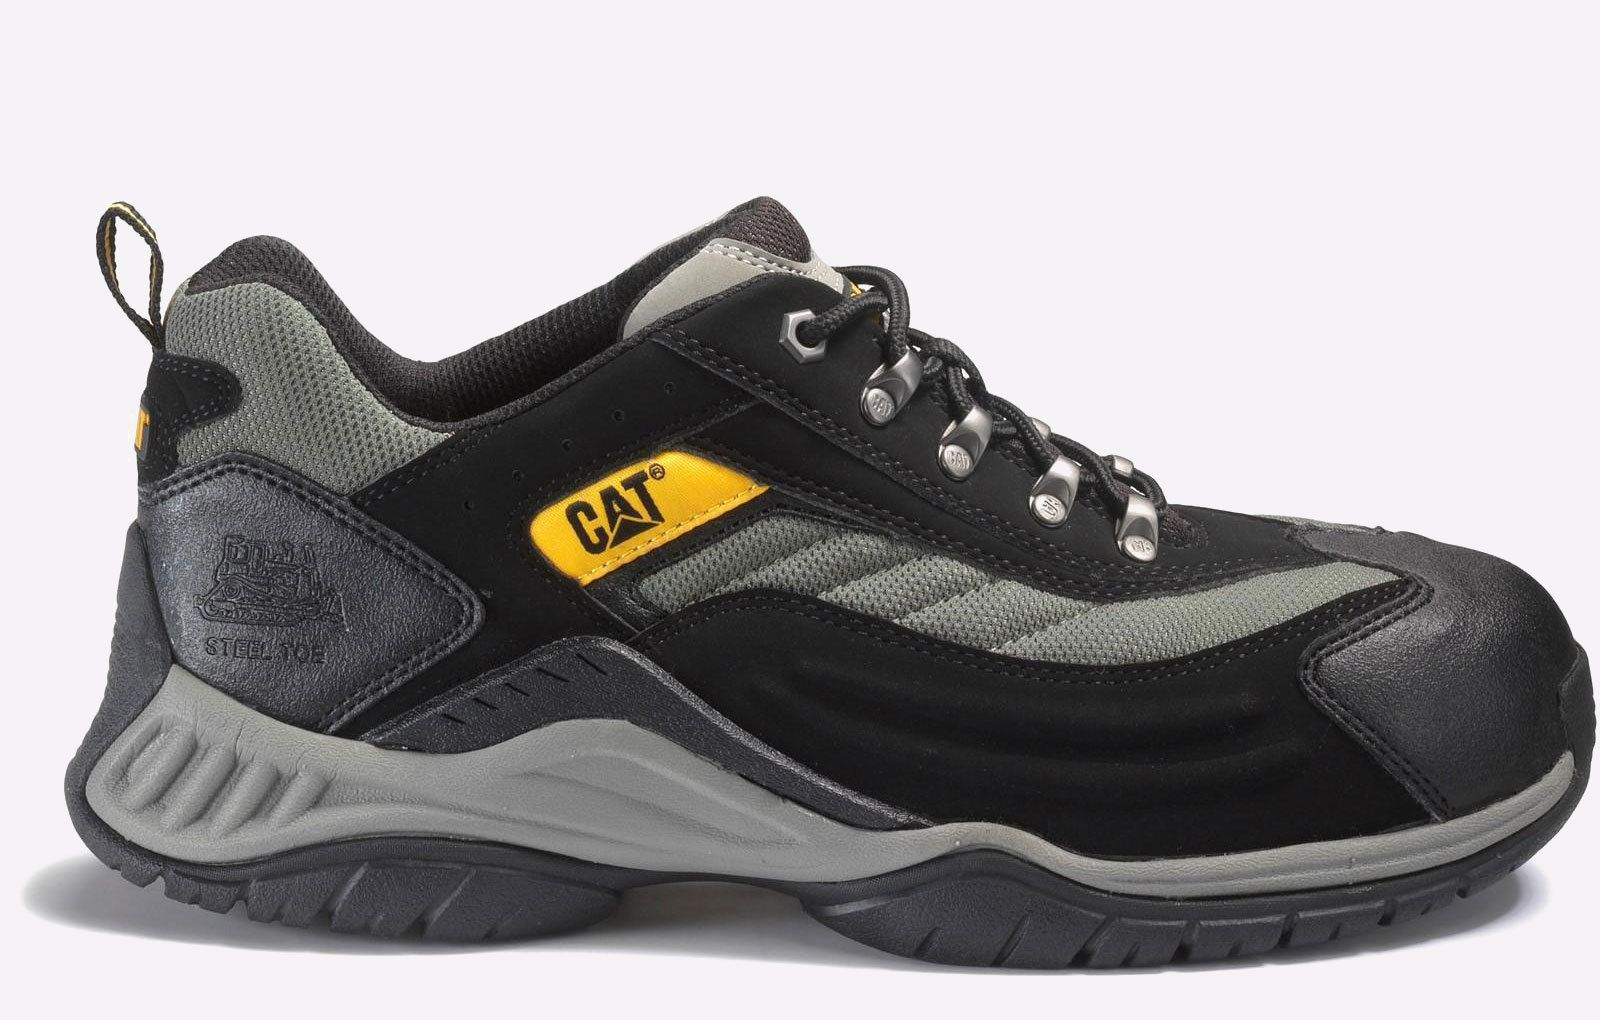 Caterpillar Moor Safety Leather Trainer Mens - GRD-10928-12208-08